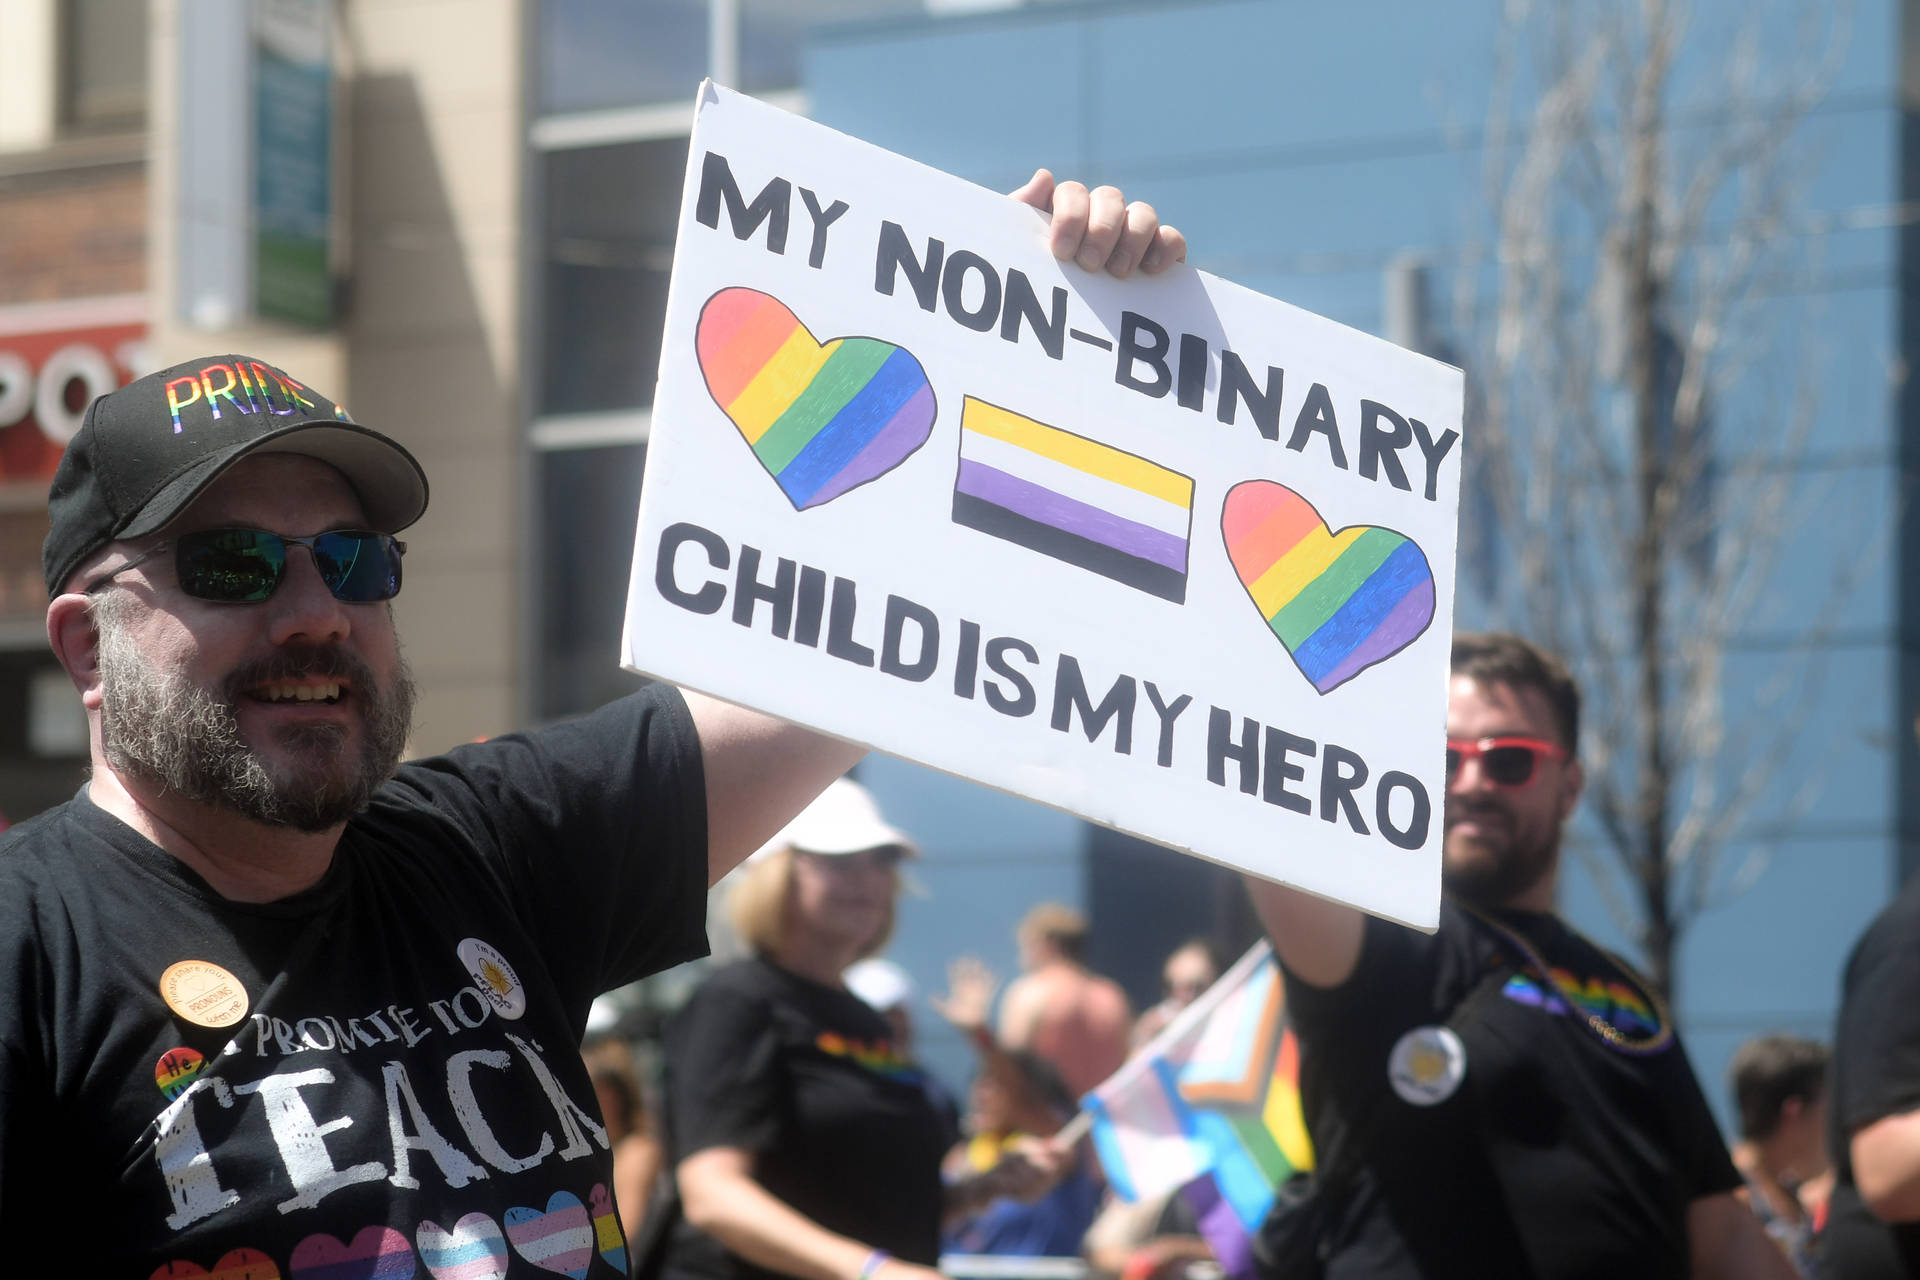 Non-binary Father In Protest Background